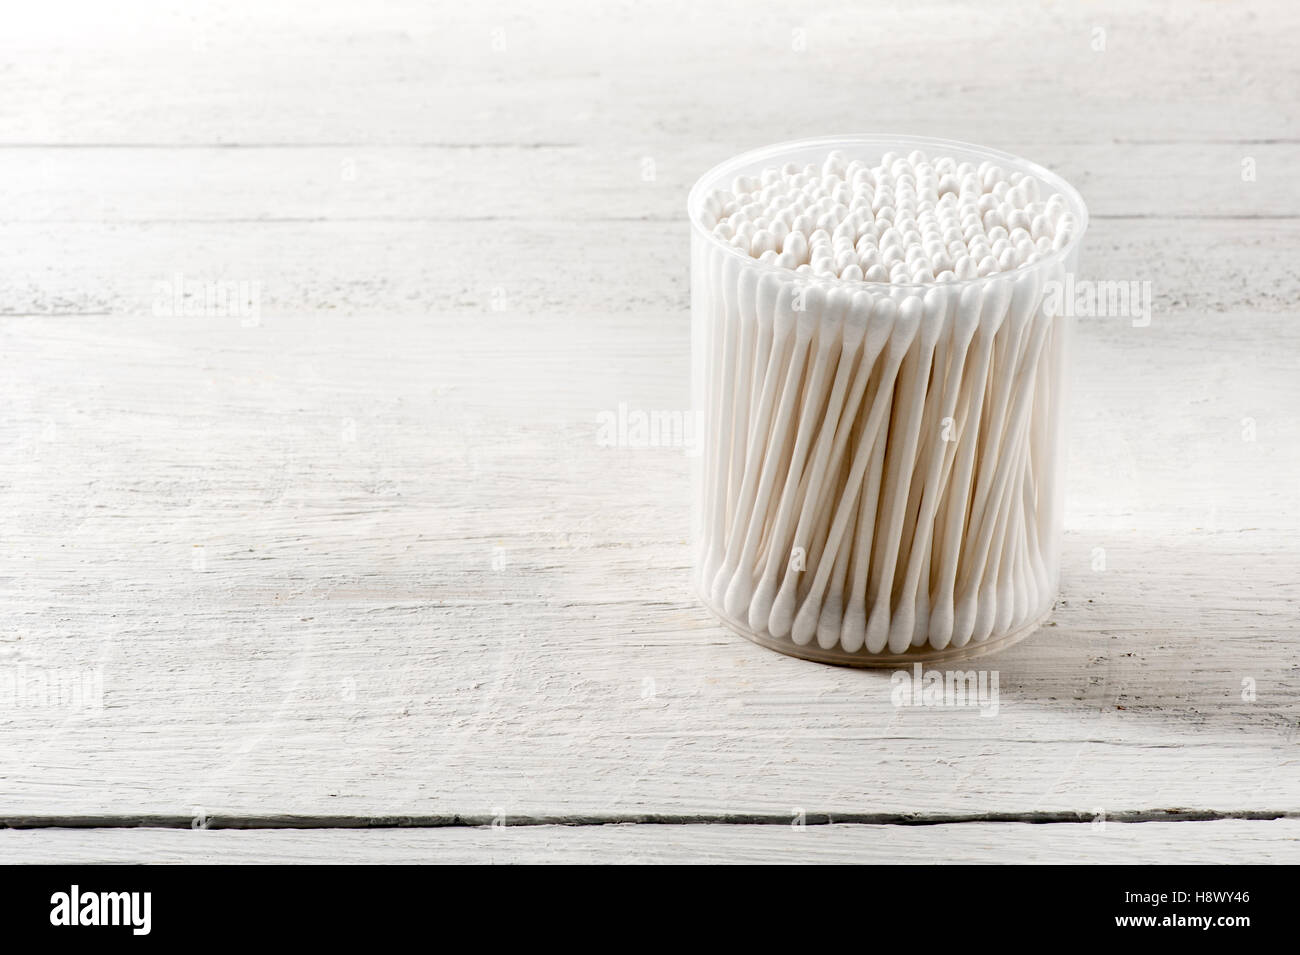 Cylindrical plastic container of clean white cotton buds in a health care and hygiene concept on a white wooden board Stock Photo